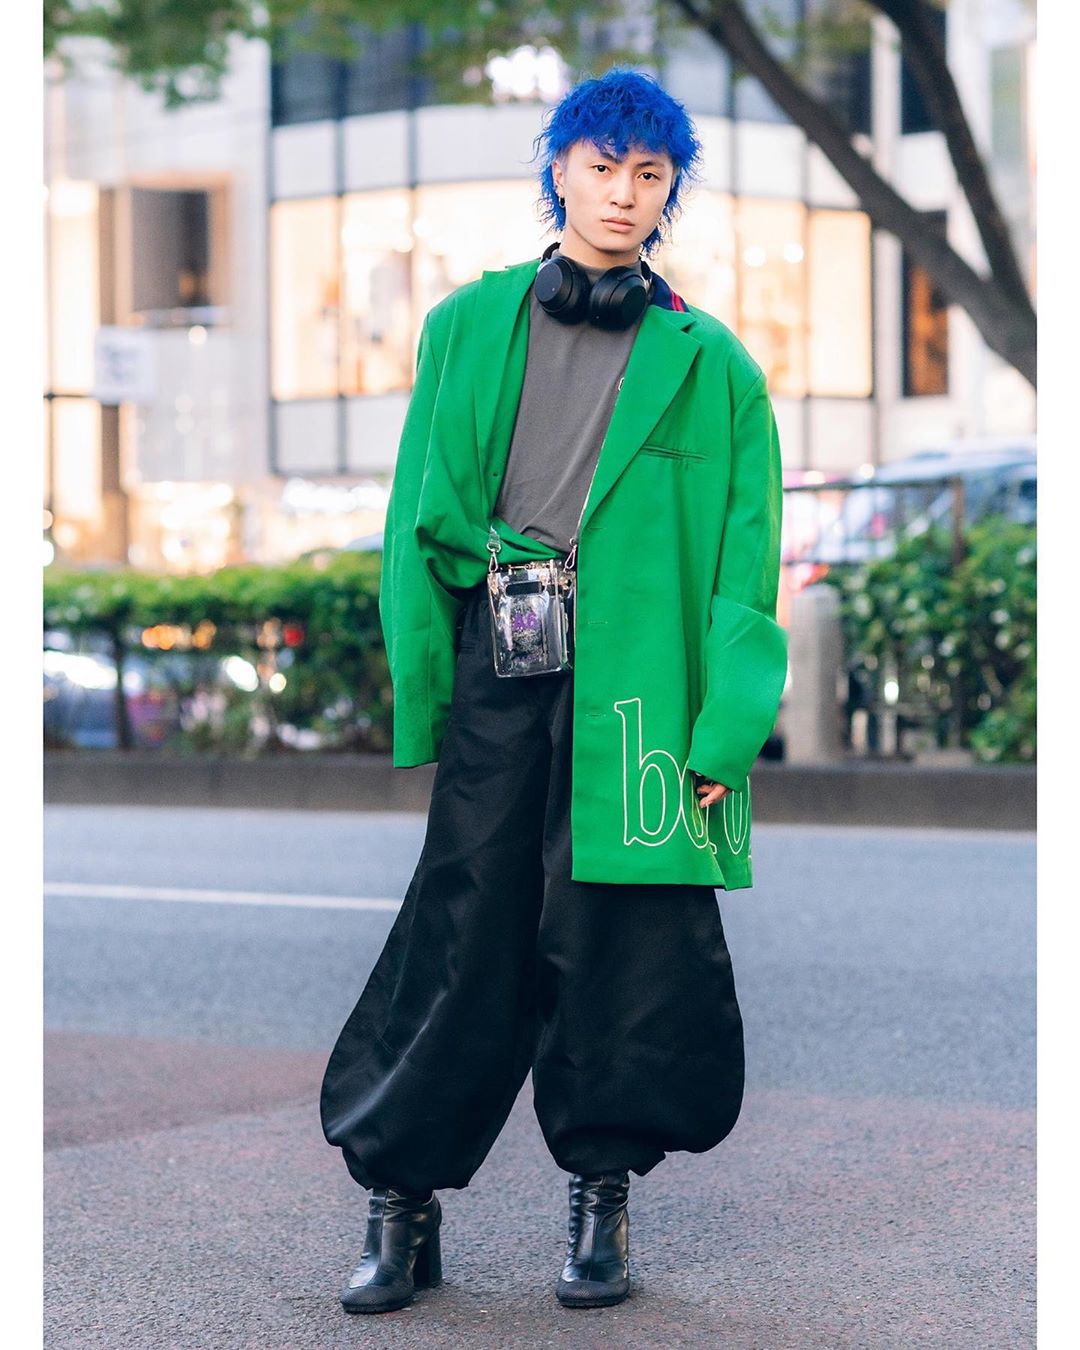 Tokyo Fashion: 18-year-old Japanese beauty school student Yuito ...